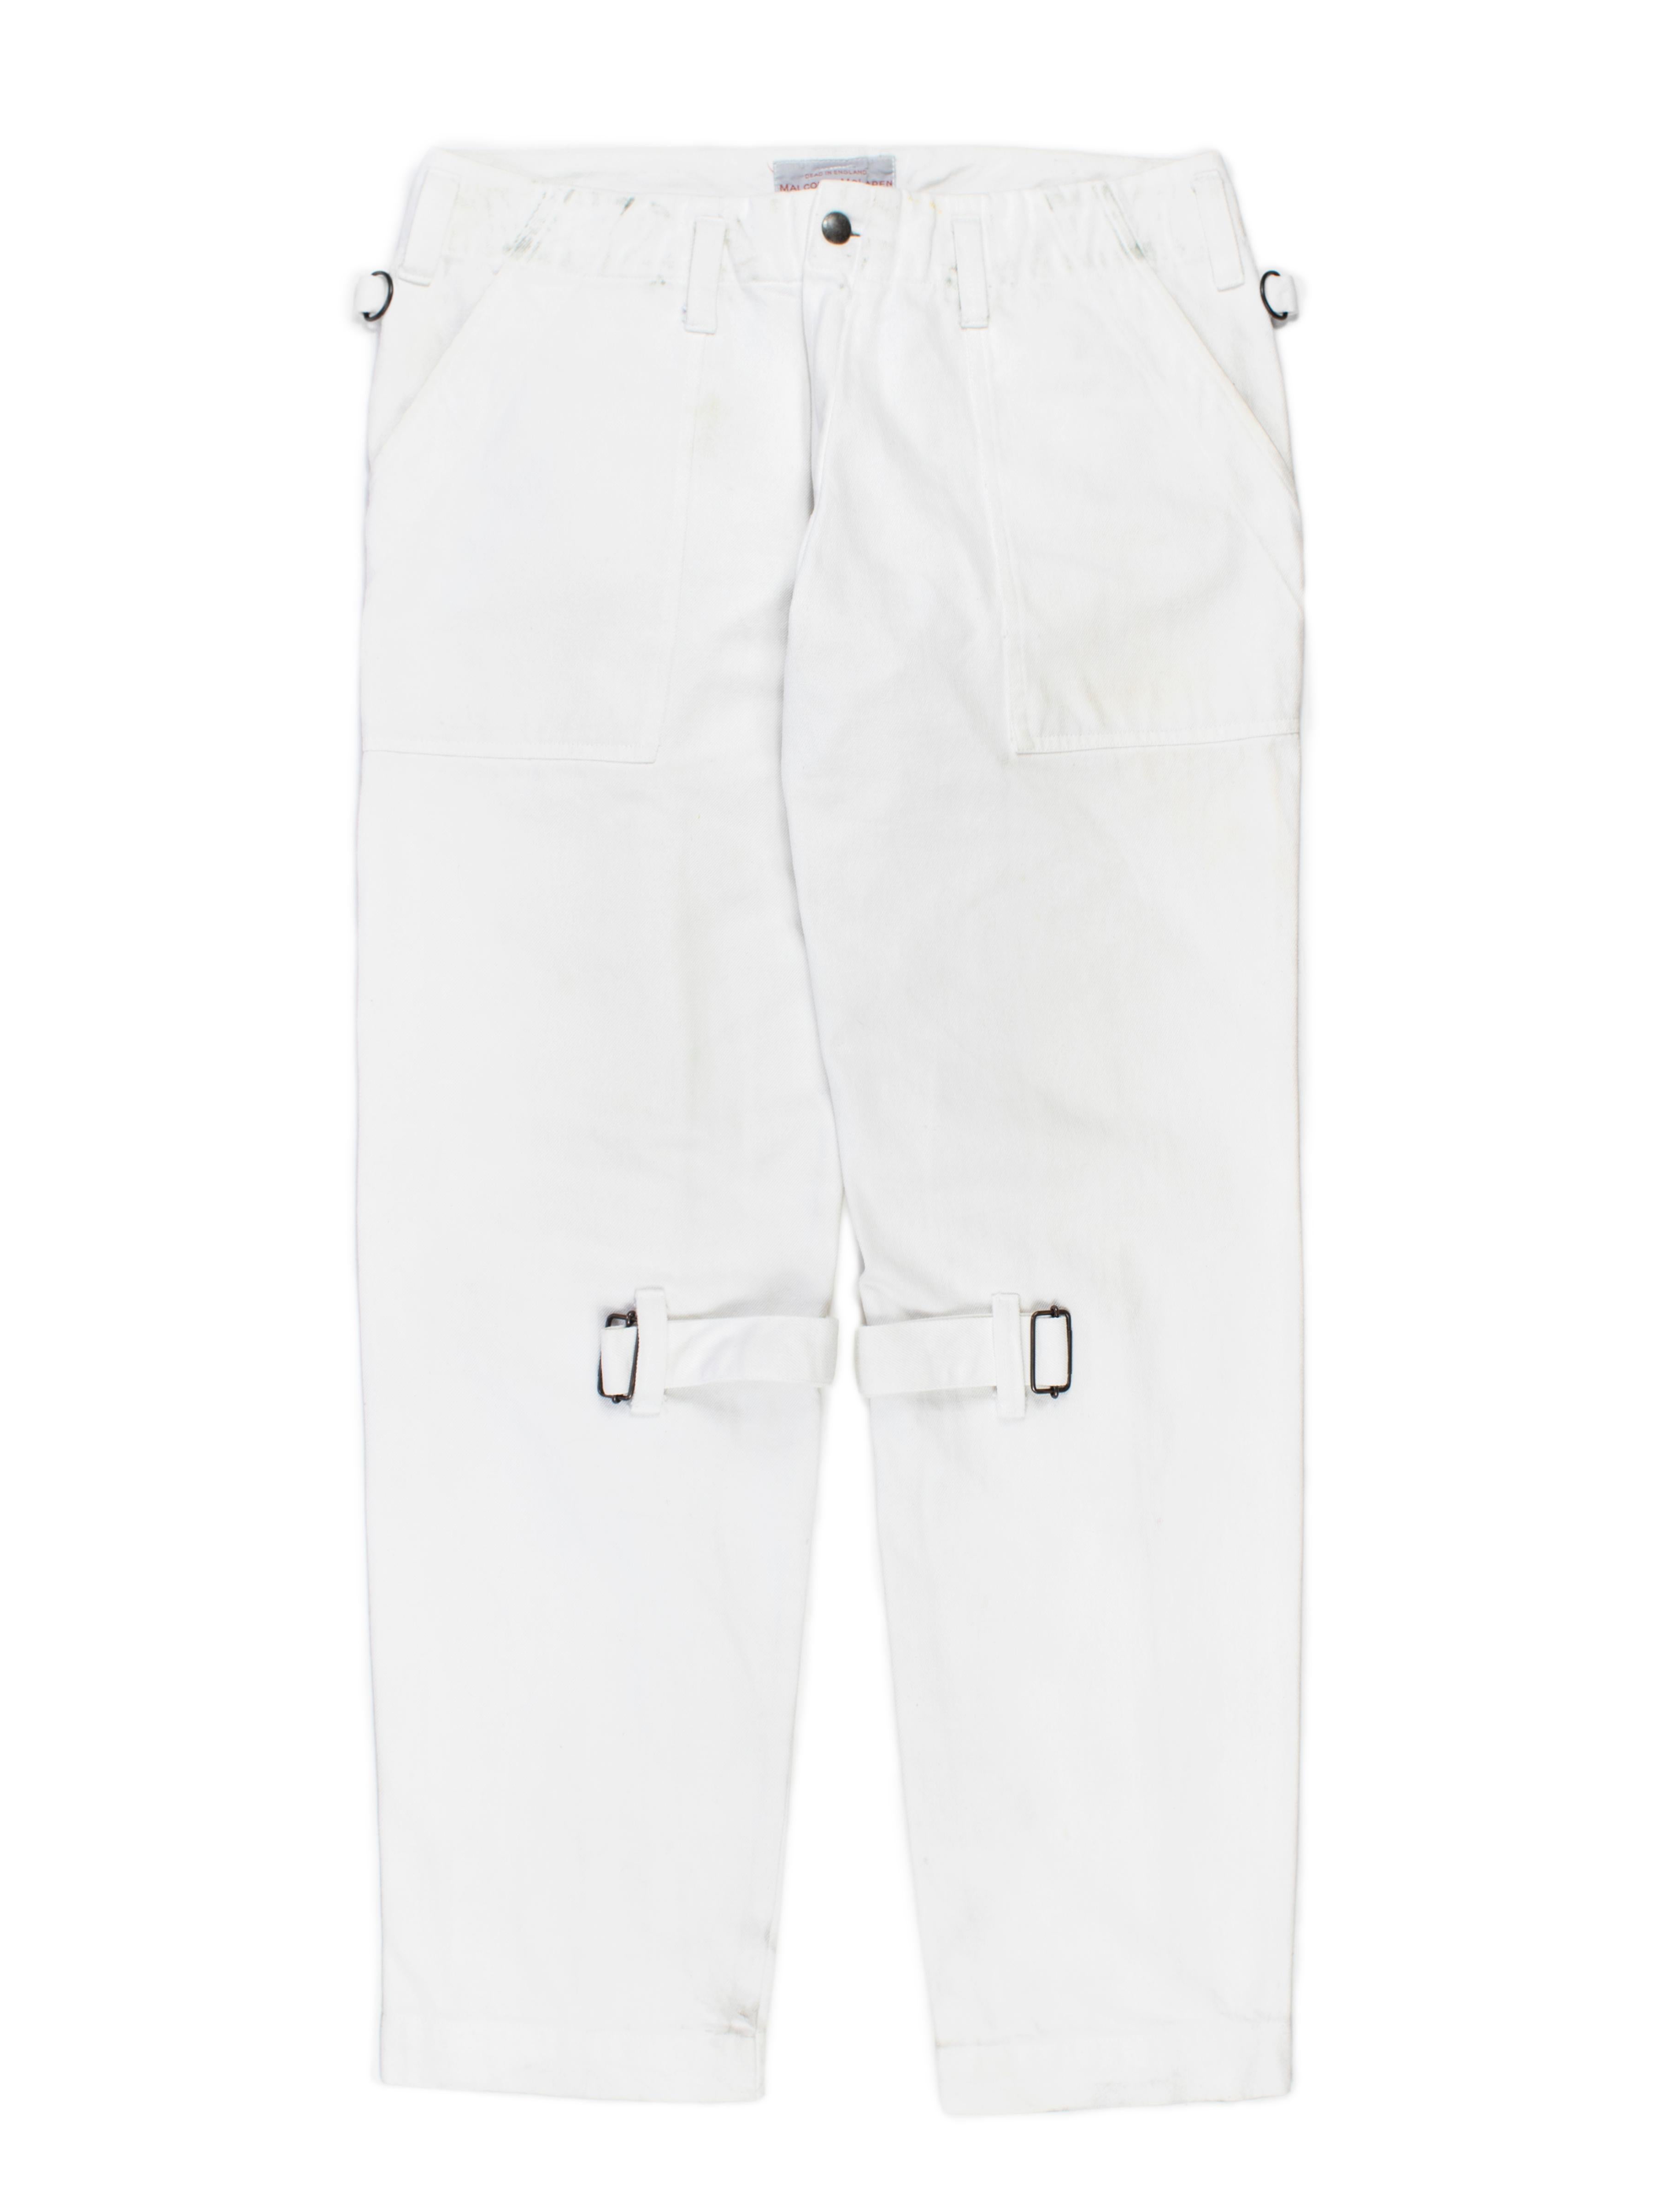 These trousers come from a limited line released under the iconoclastic McLaren’s own name in the ‘90s. They have the label’s thumbprint tag on the back pocket, and feature the same detailing as the pants he put out under Seditionaries with Vivienne